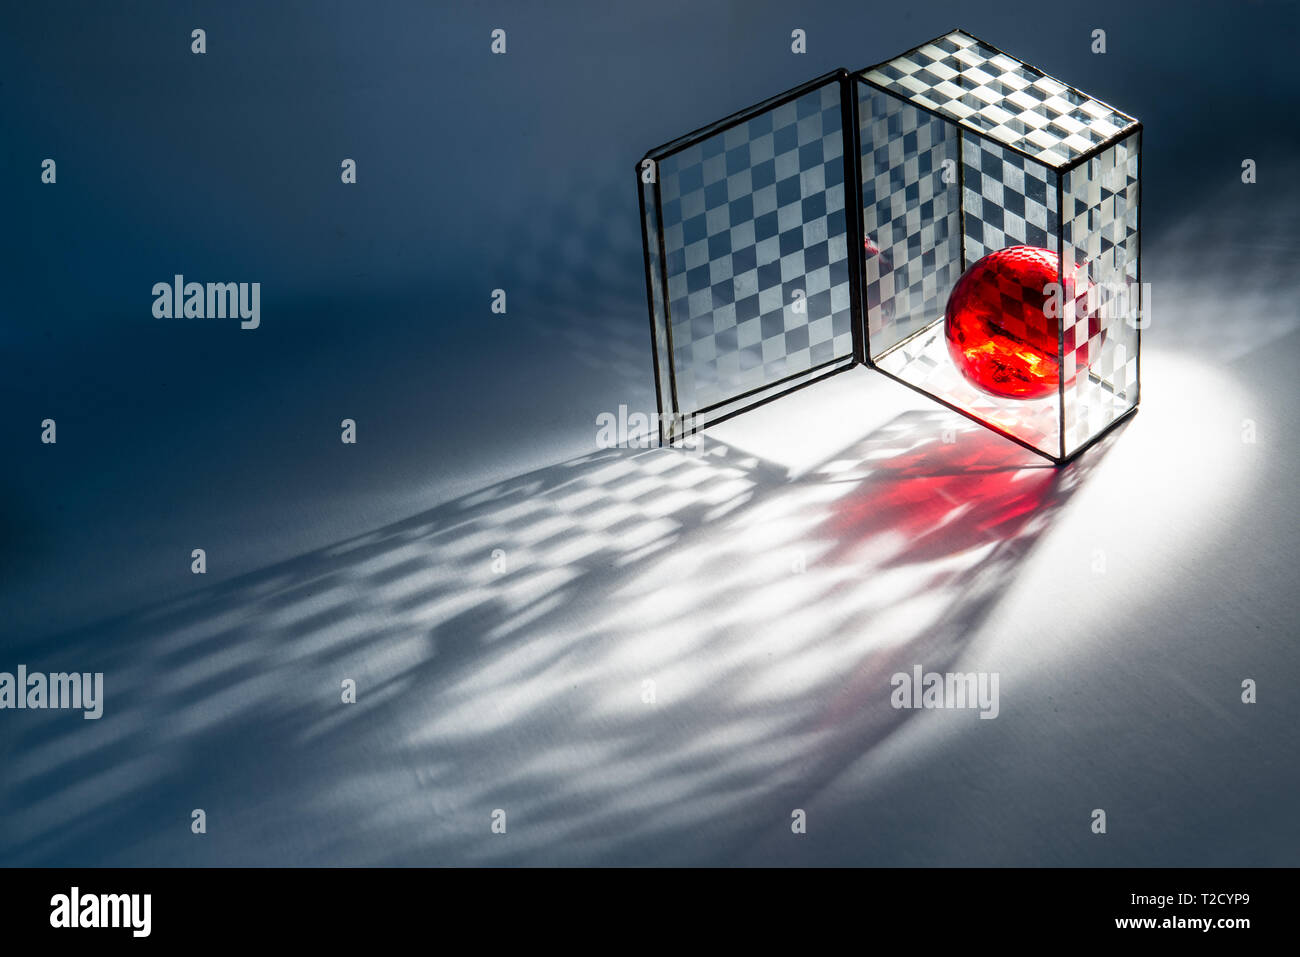 Red glass ball in checkered glass box. Stock Photo